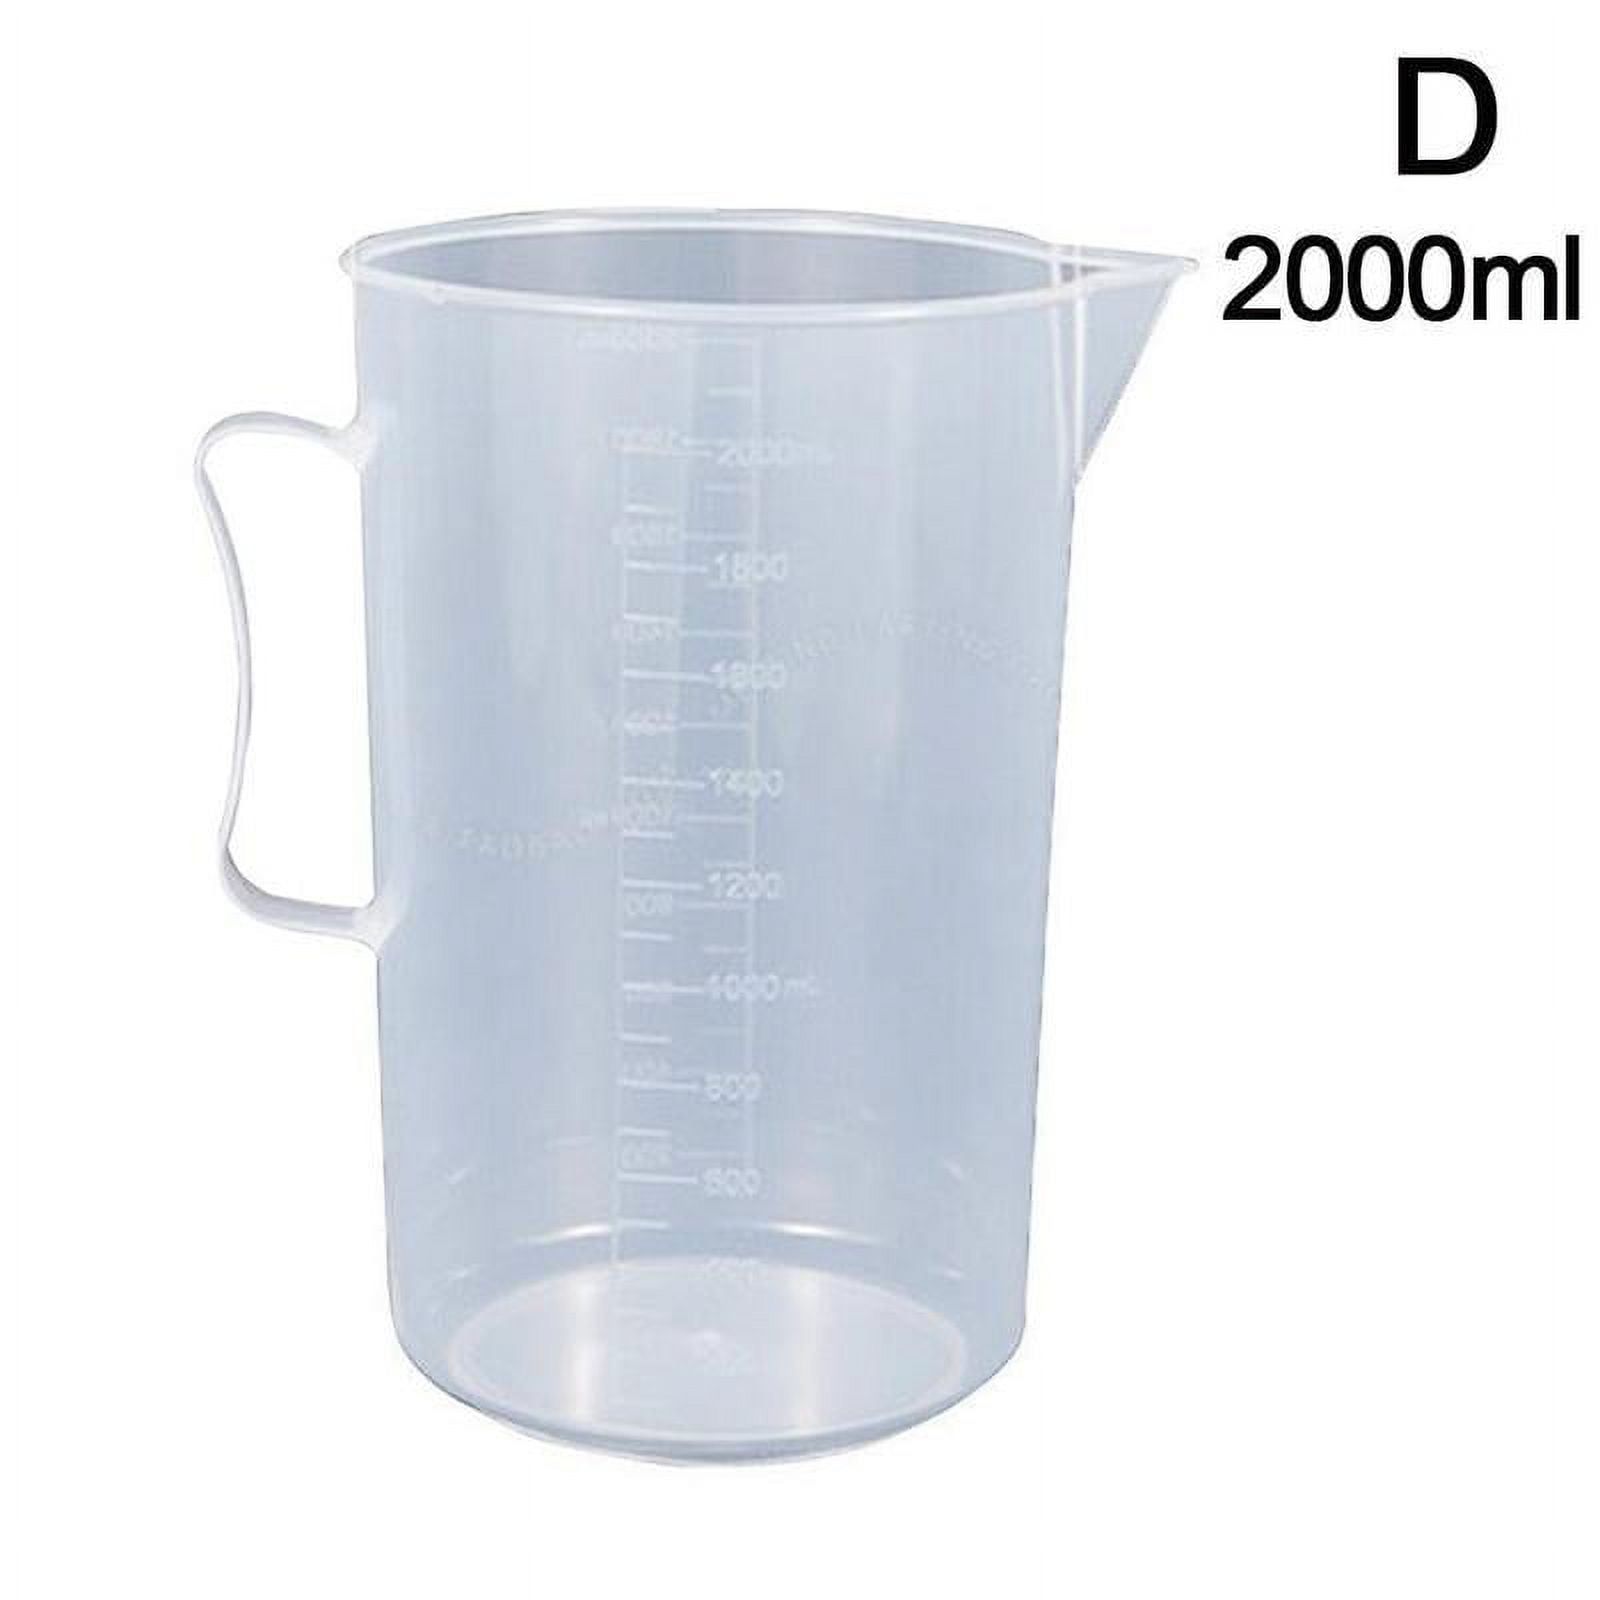 100ML Kitchen Measuring Cup With Clear Scales Silicone Resin Glue